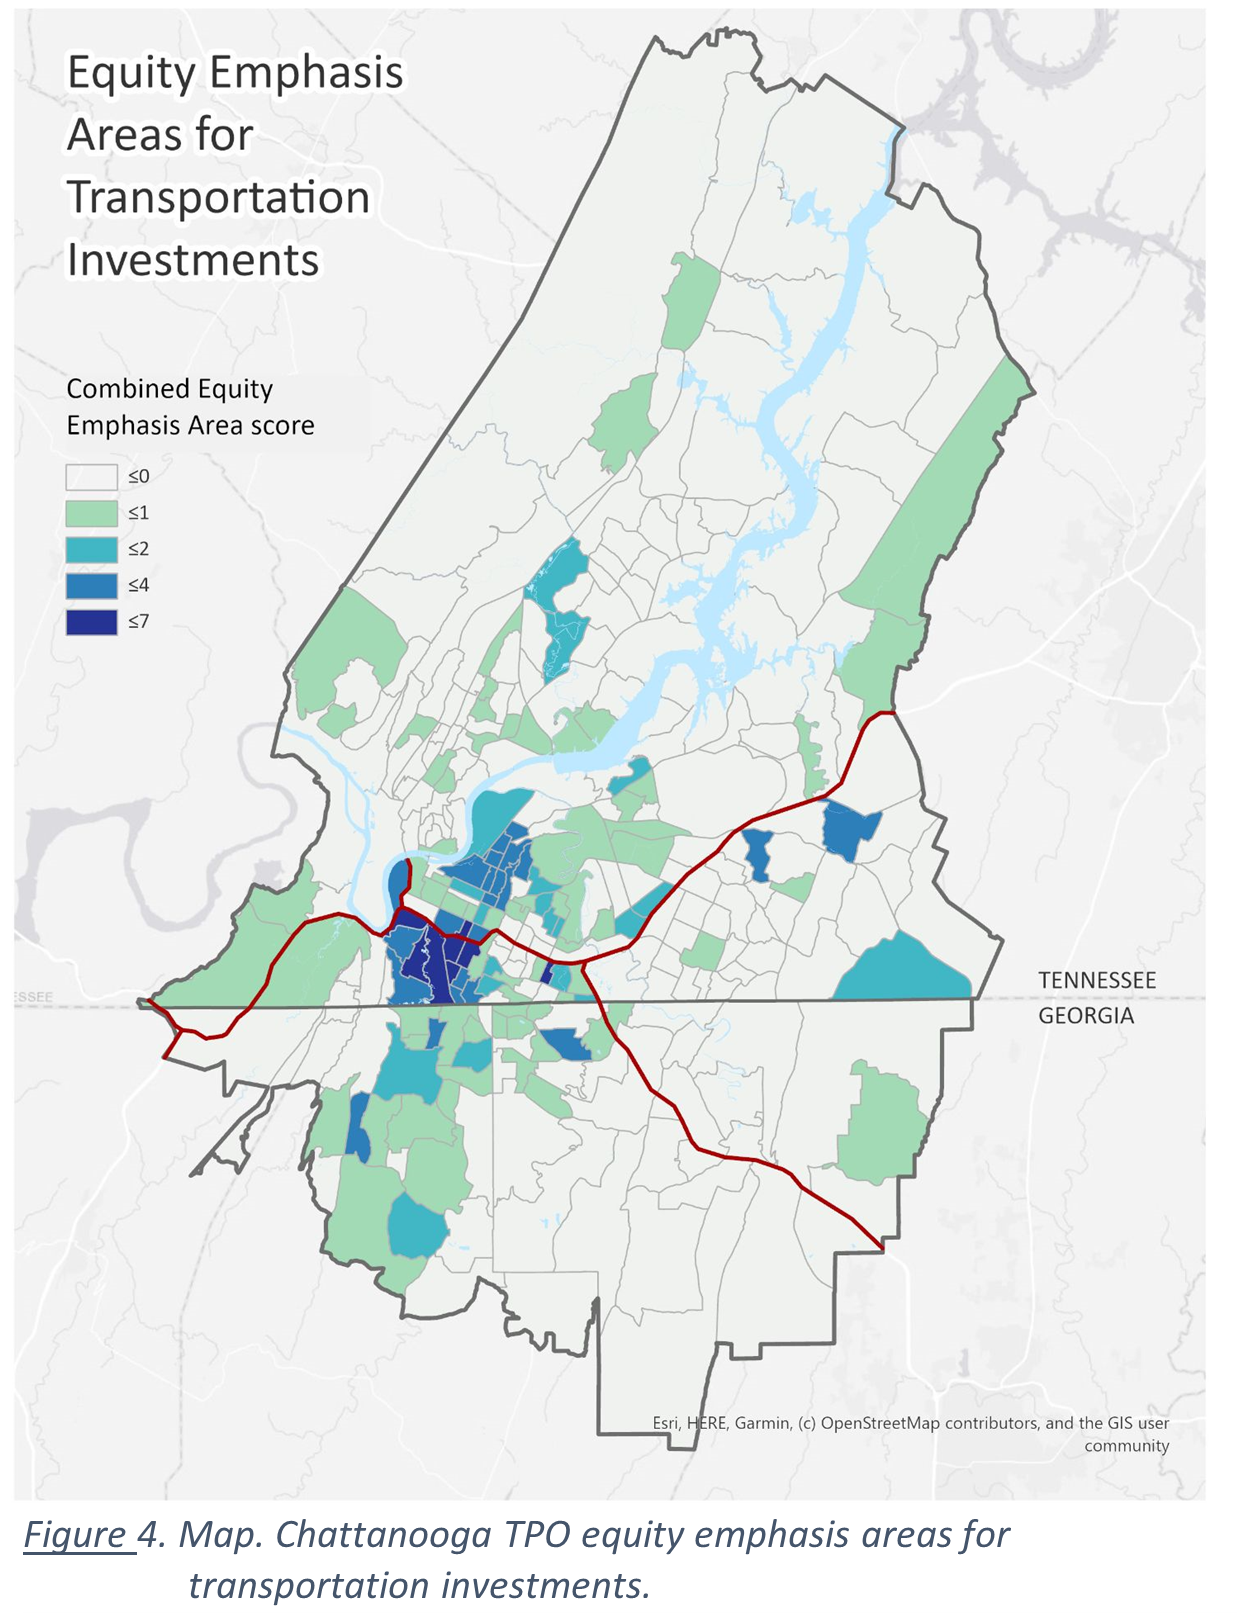 A map of Chattanooga transportation planning organization equity emphasis areas for transportation investments